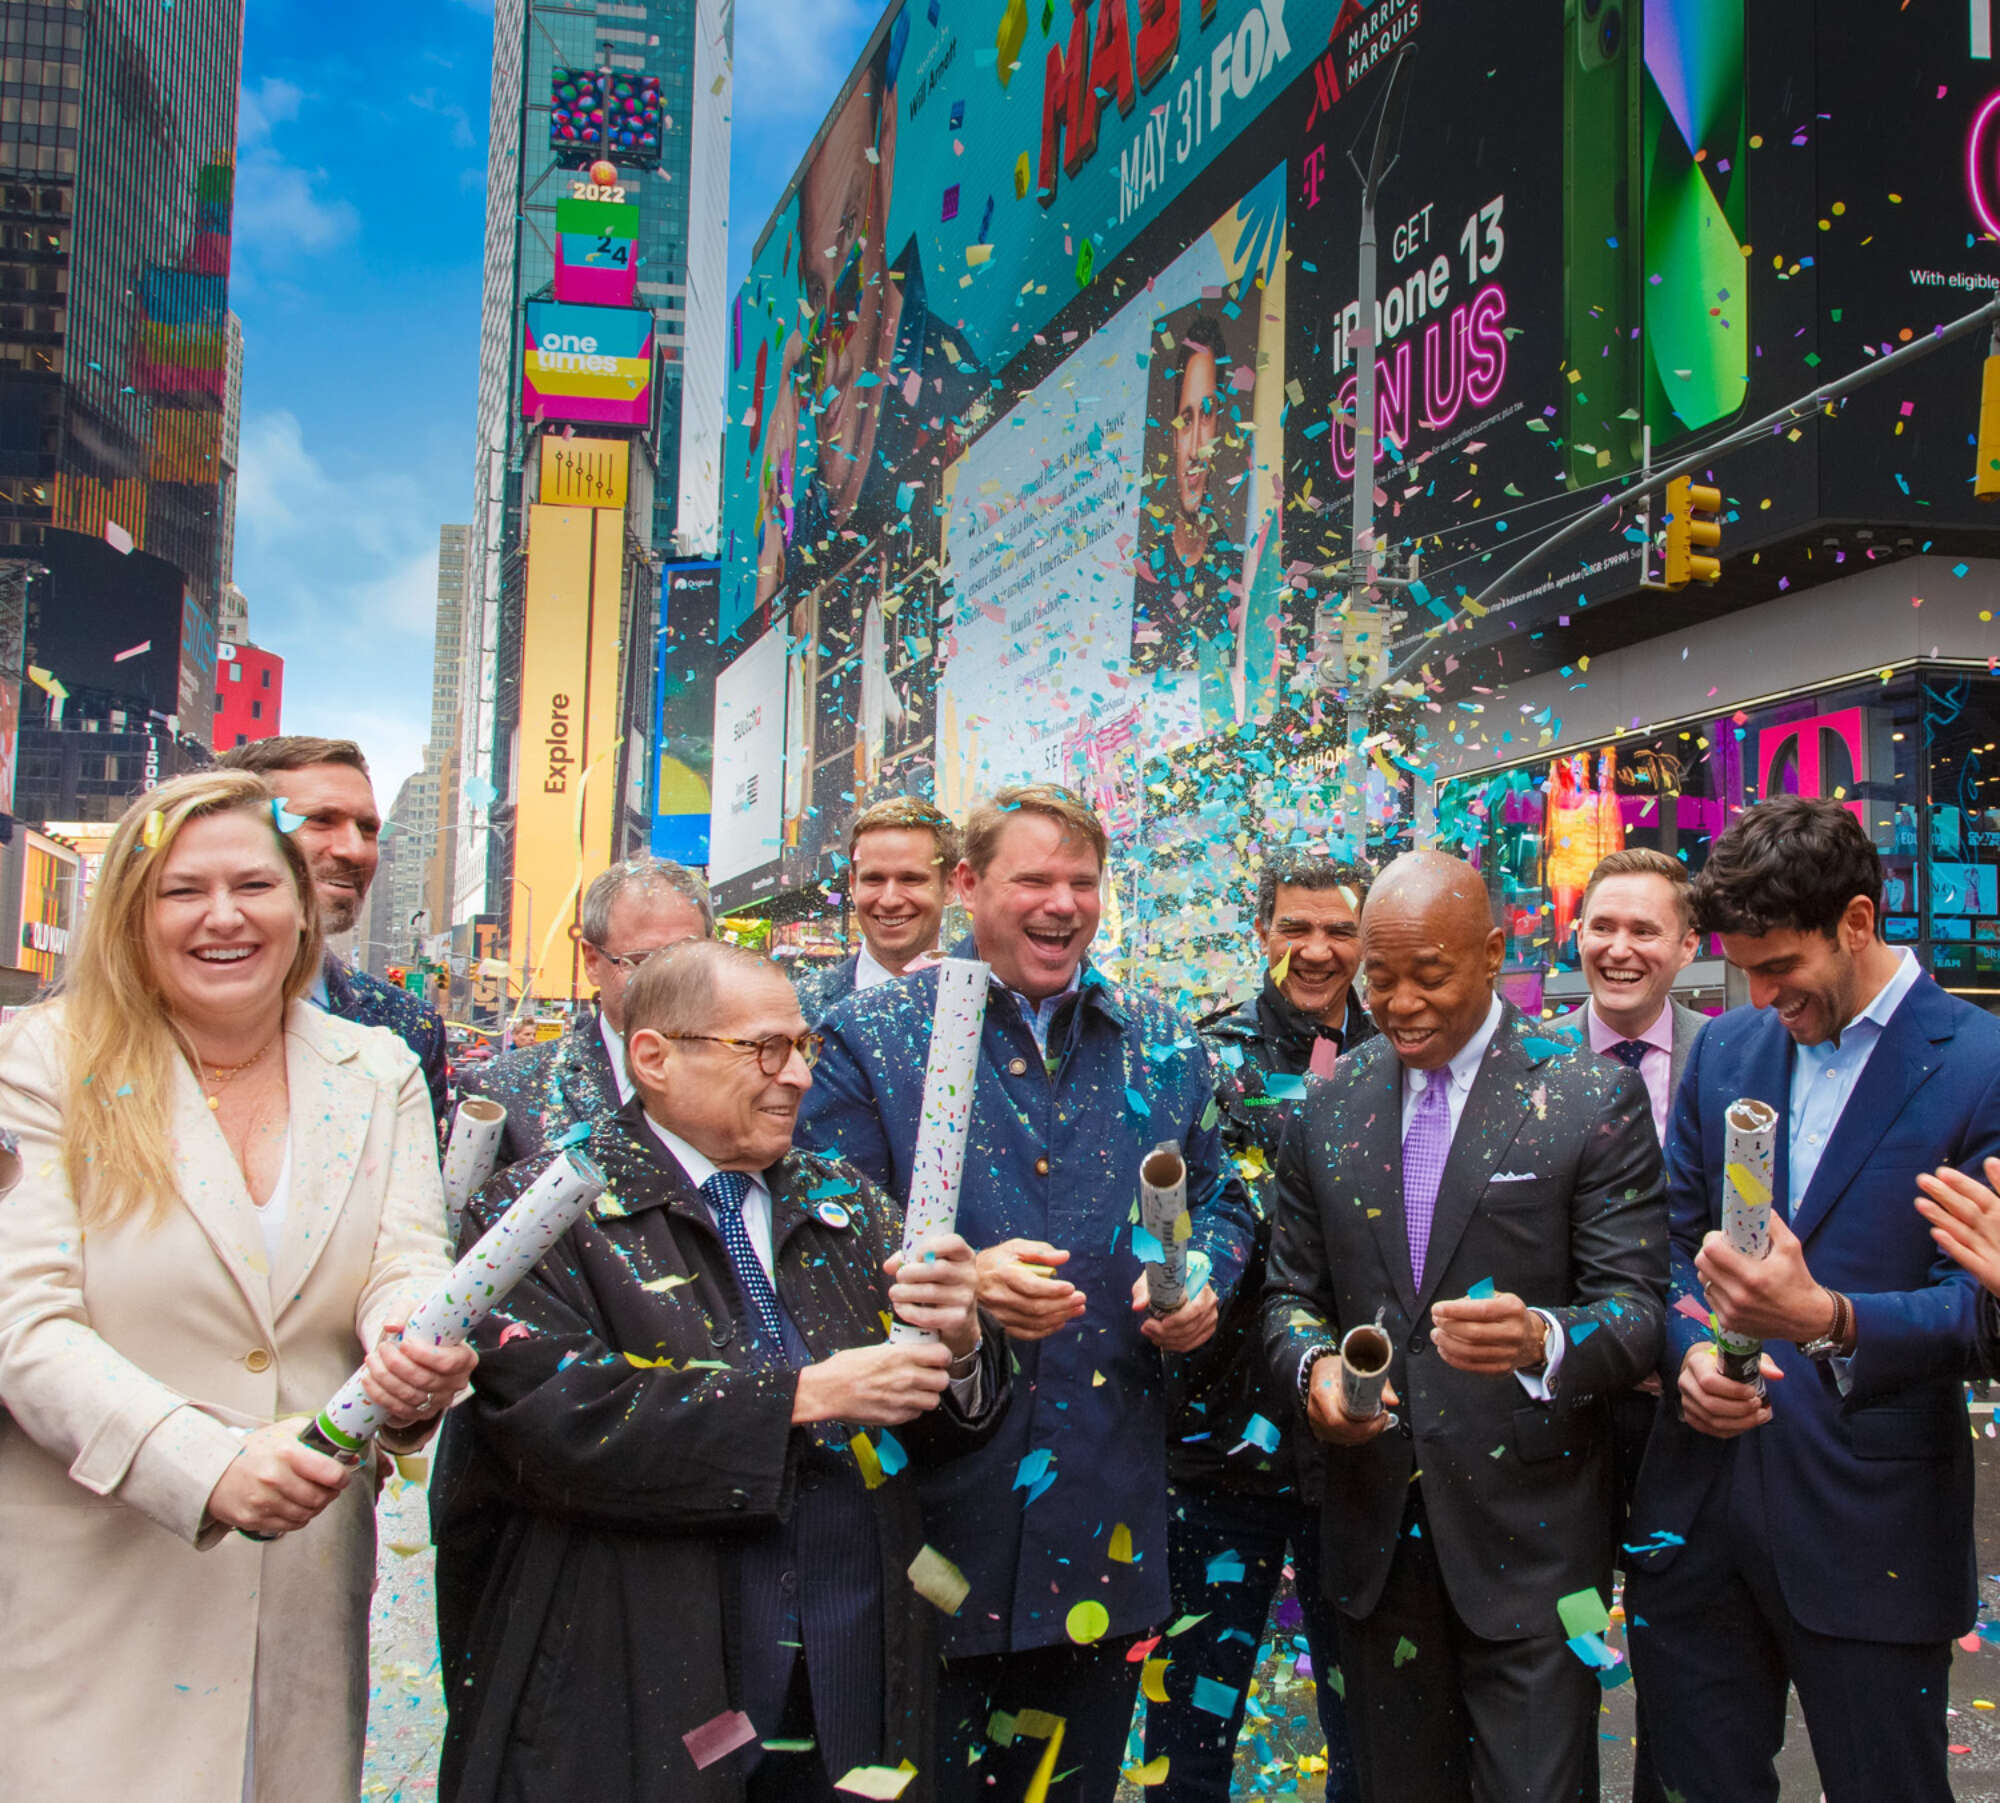 People gathered in Times Square launching confetti to celebrate the announcement of One Time Square's redevelopment